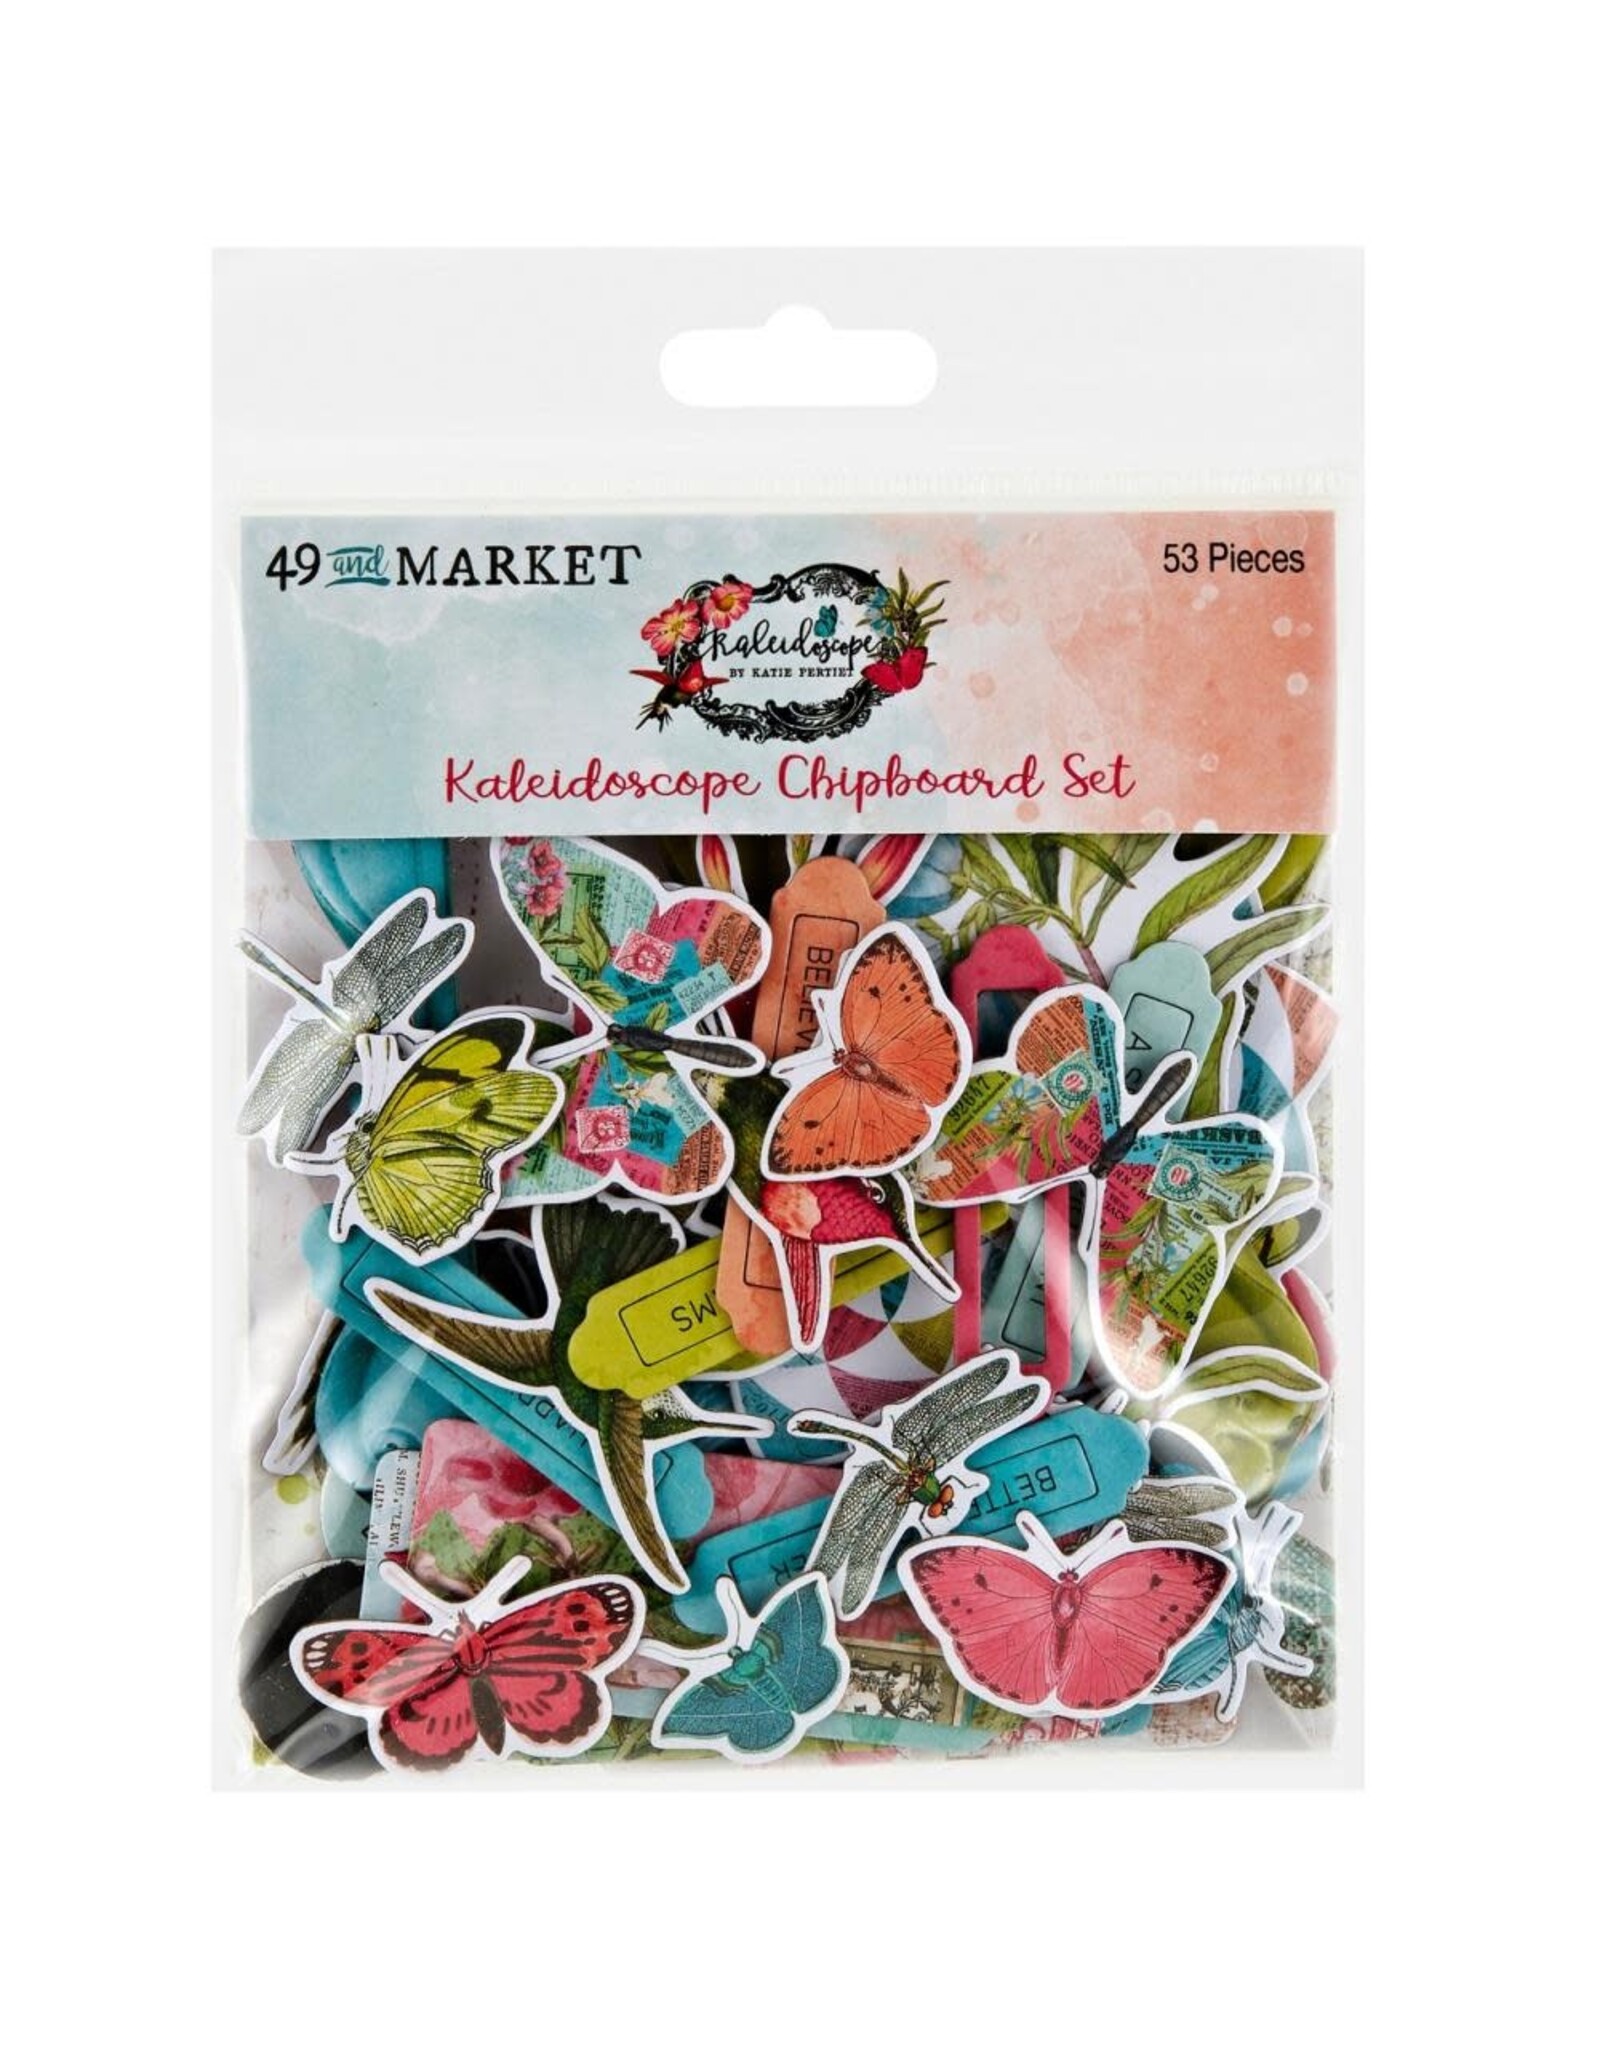 49 AND MARKET 49 AND MARKET KALEIDOSCOPE CHIPBOARD SET 53 PIECES